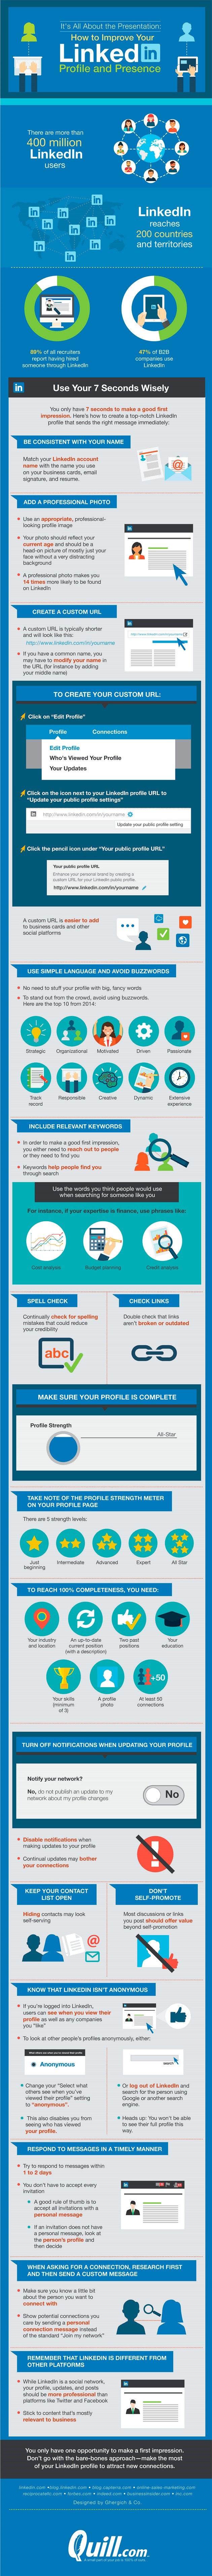 how-to-improve-your-linkedin-profile-presence-infographic